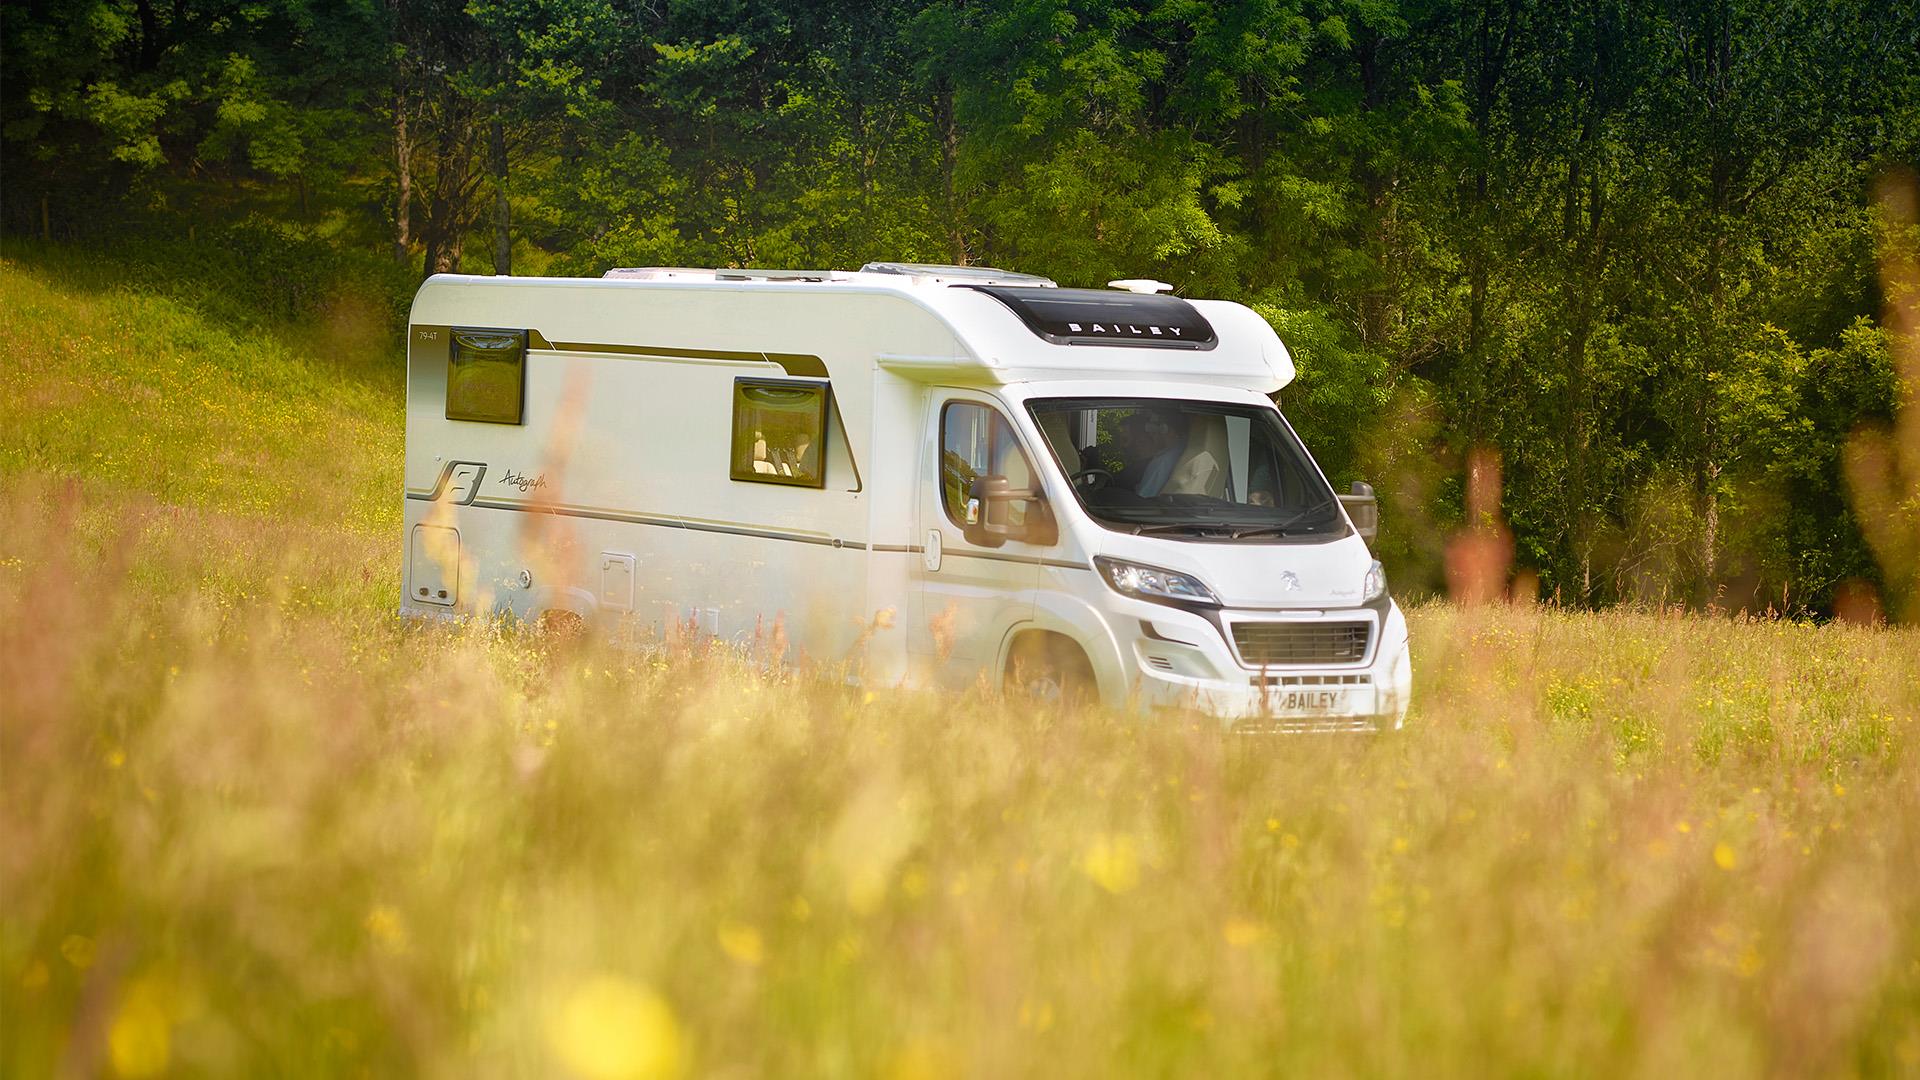 Motorhome safety on the road